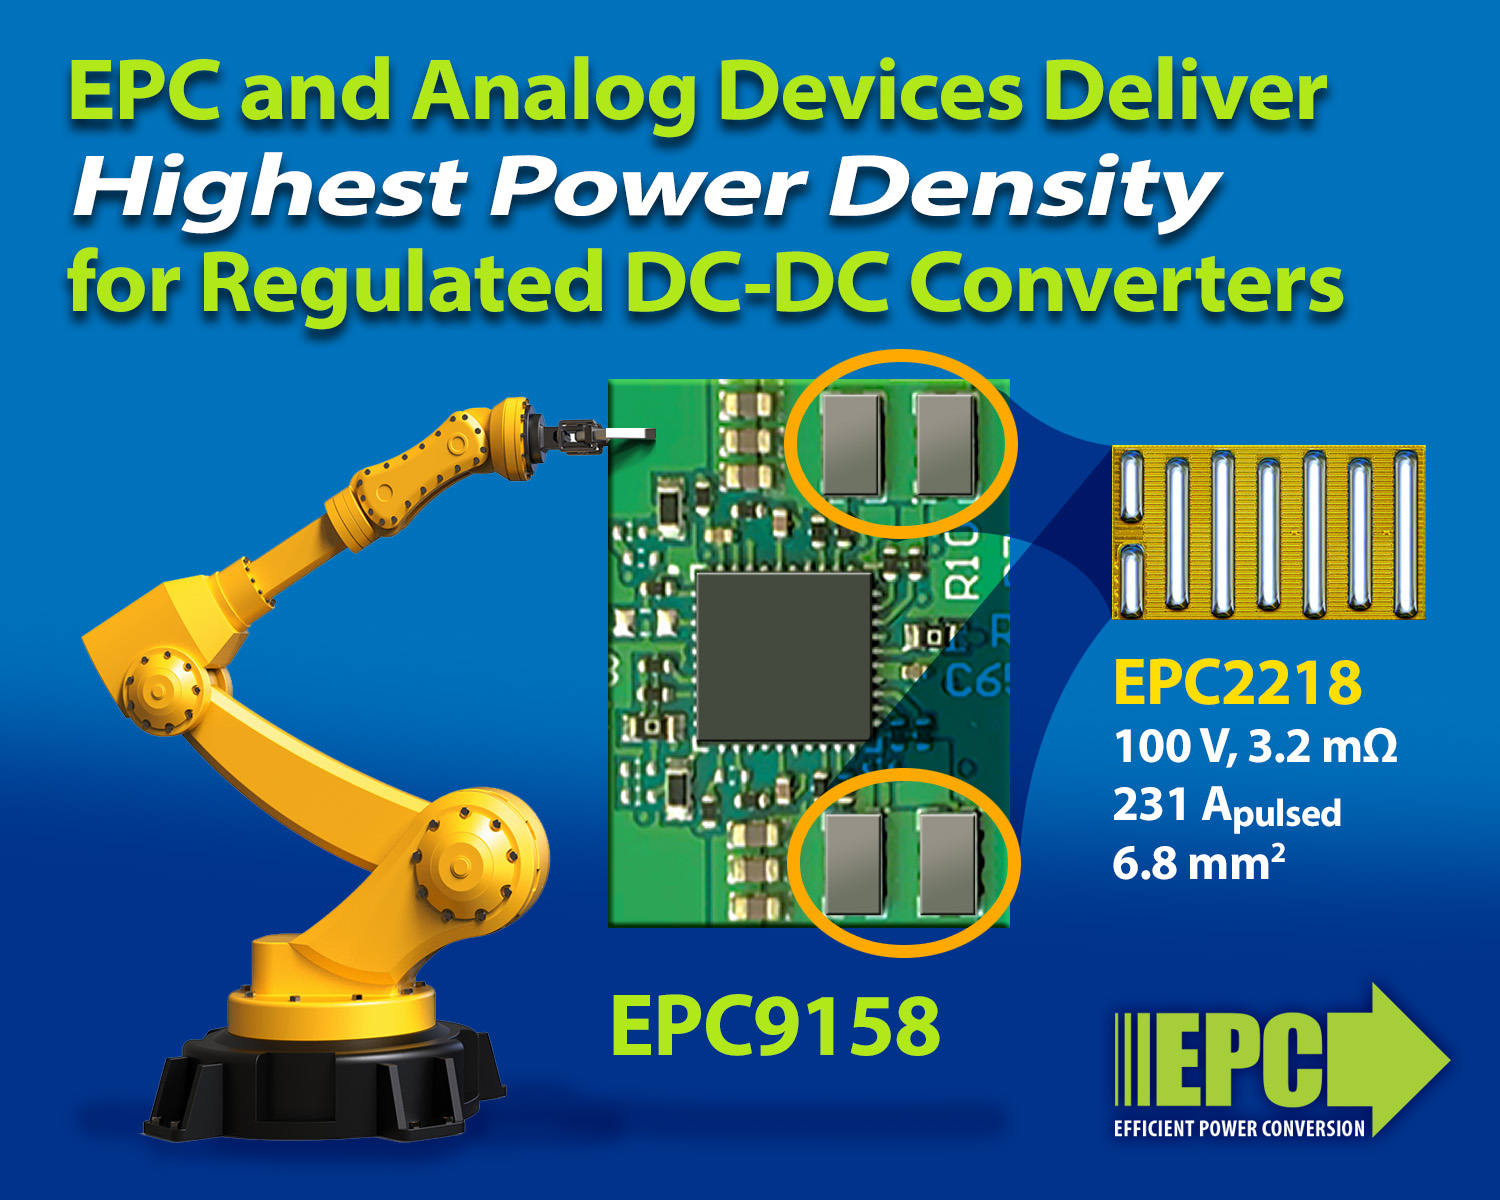 Highest Power Density for Regulated DC-DC Converters Achieved Using EPC GaN FETs and Analog Devices Controller